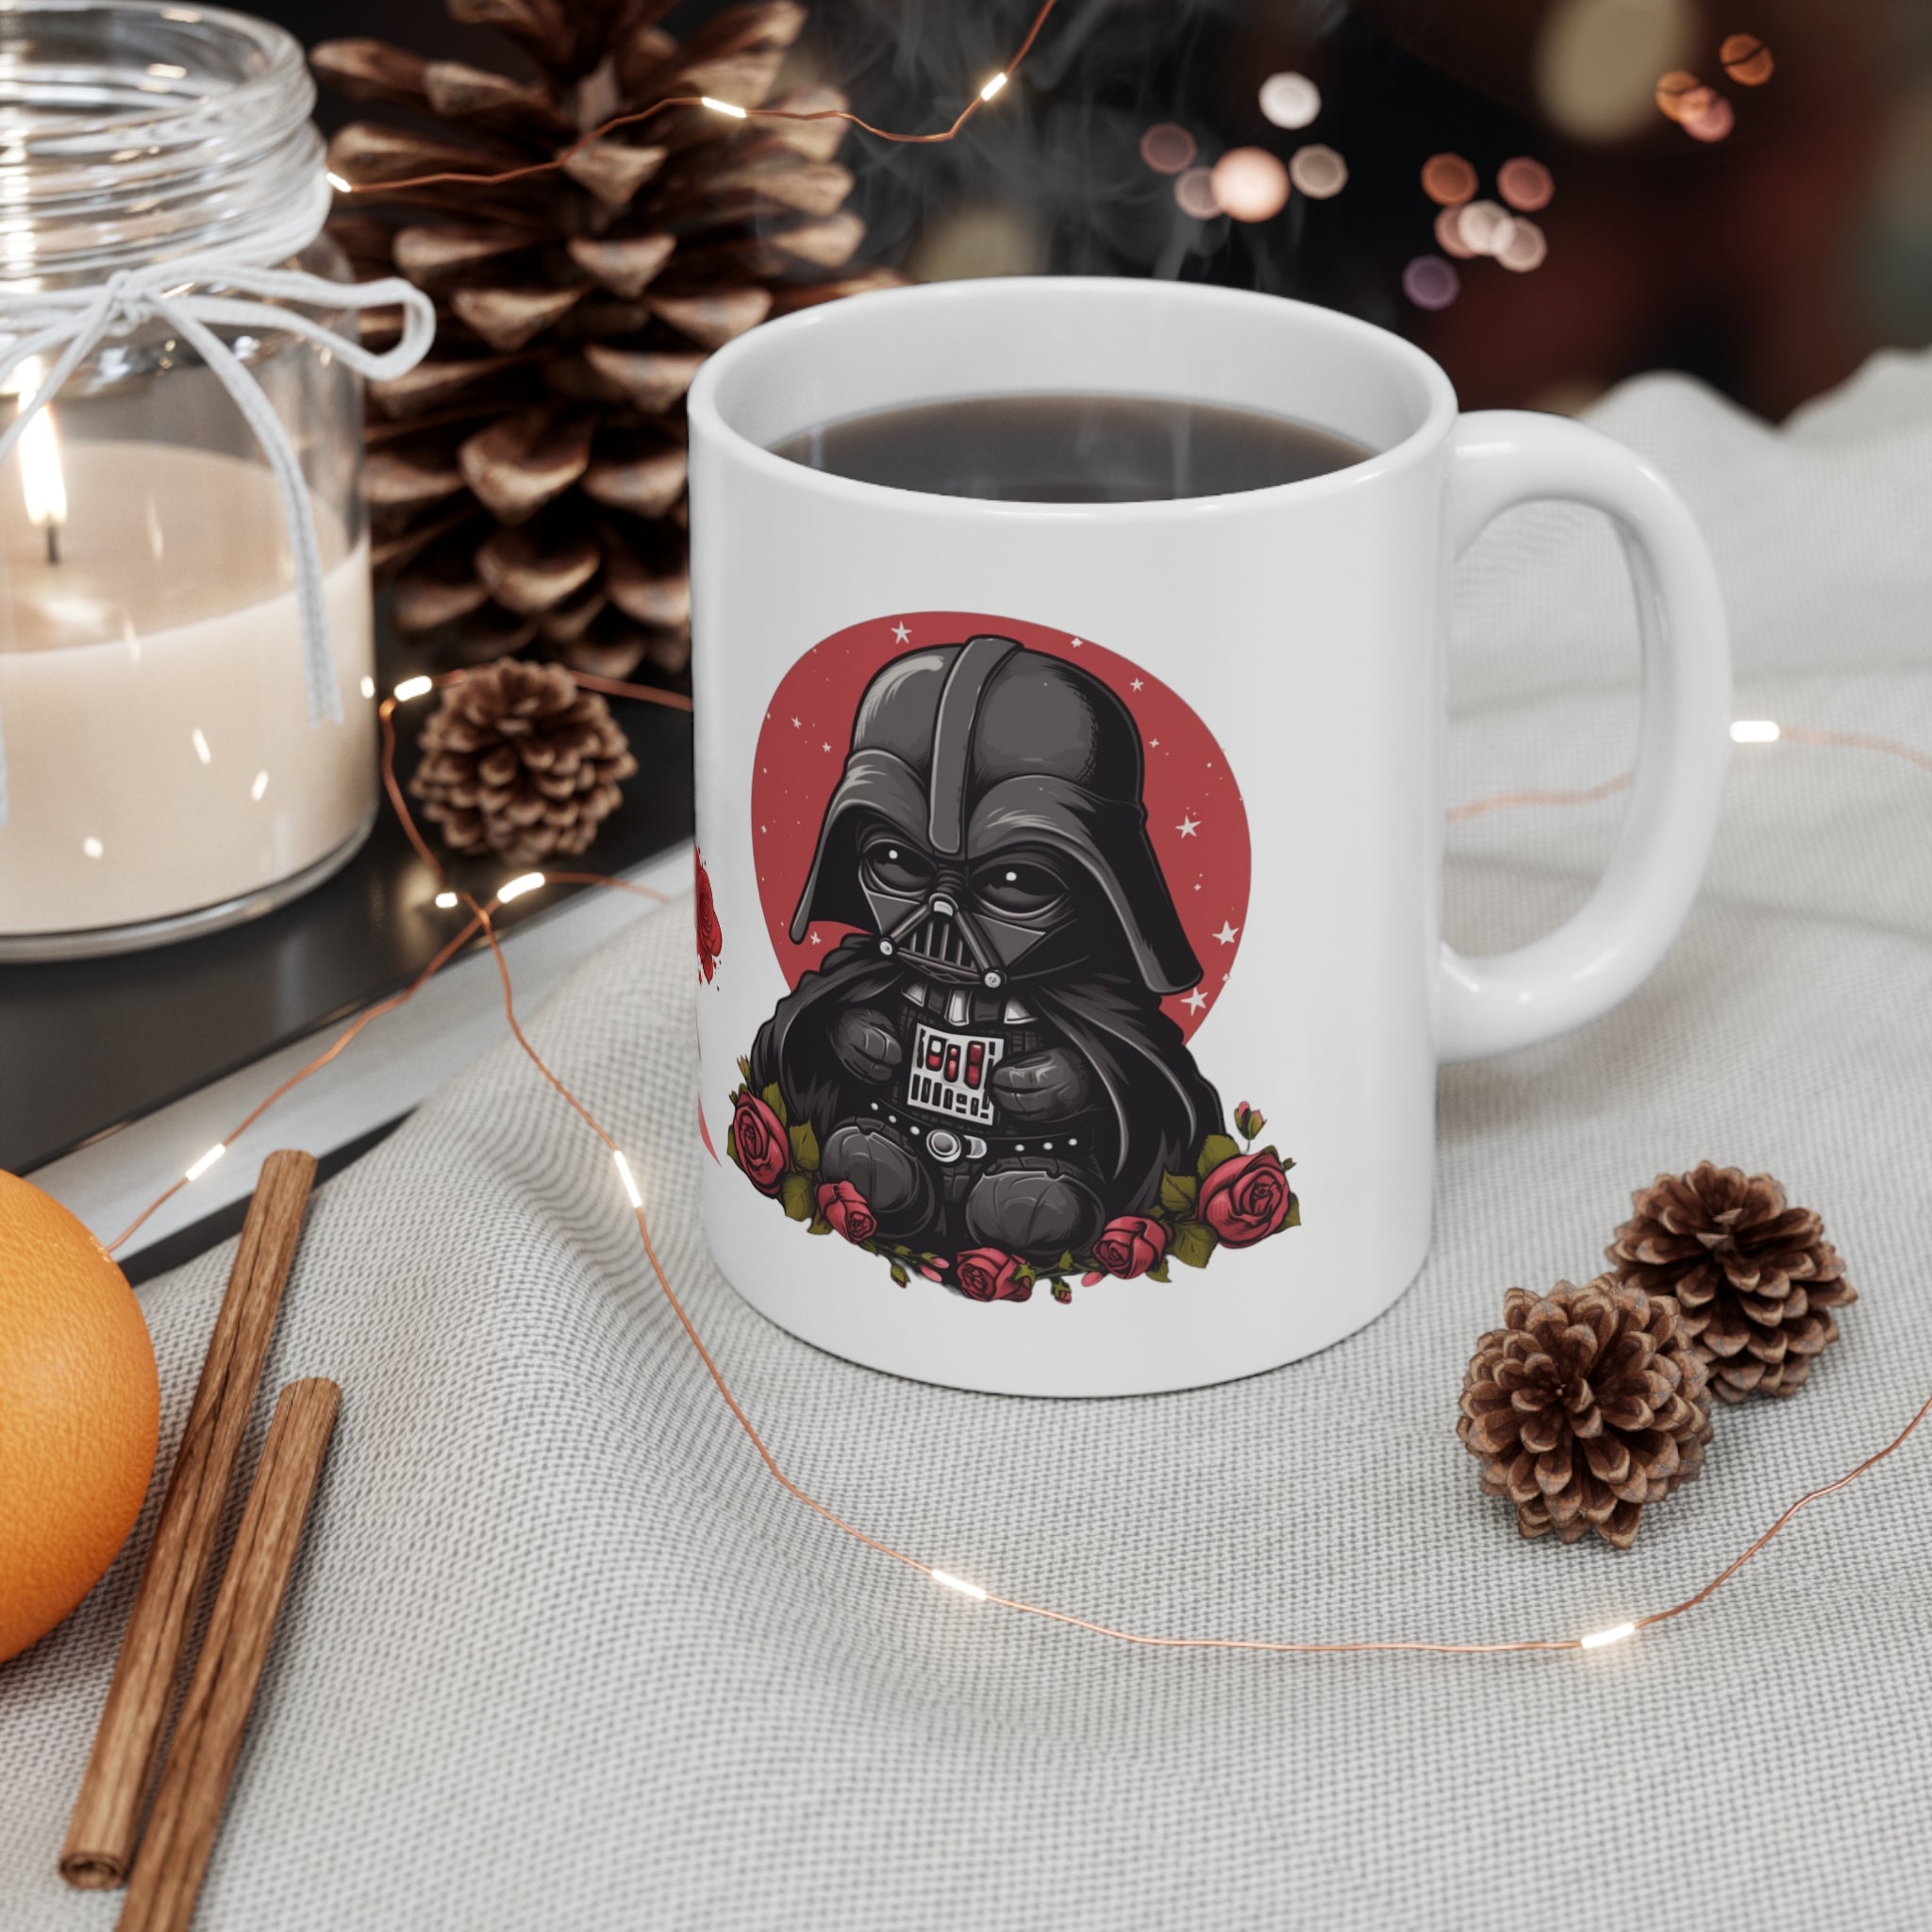 For Fans of the Original Trilogy! Add to your Collection . Classic Galaxy Villain Romantic Valentine's Day Cupid Ceramic Mug 11oz - Unique Gift for the One You Love or for the Ideal Gift for Friends